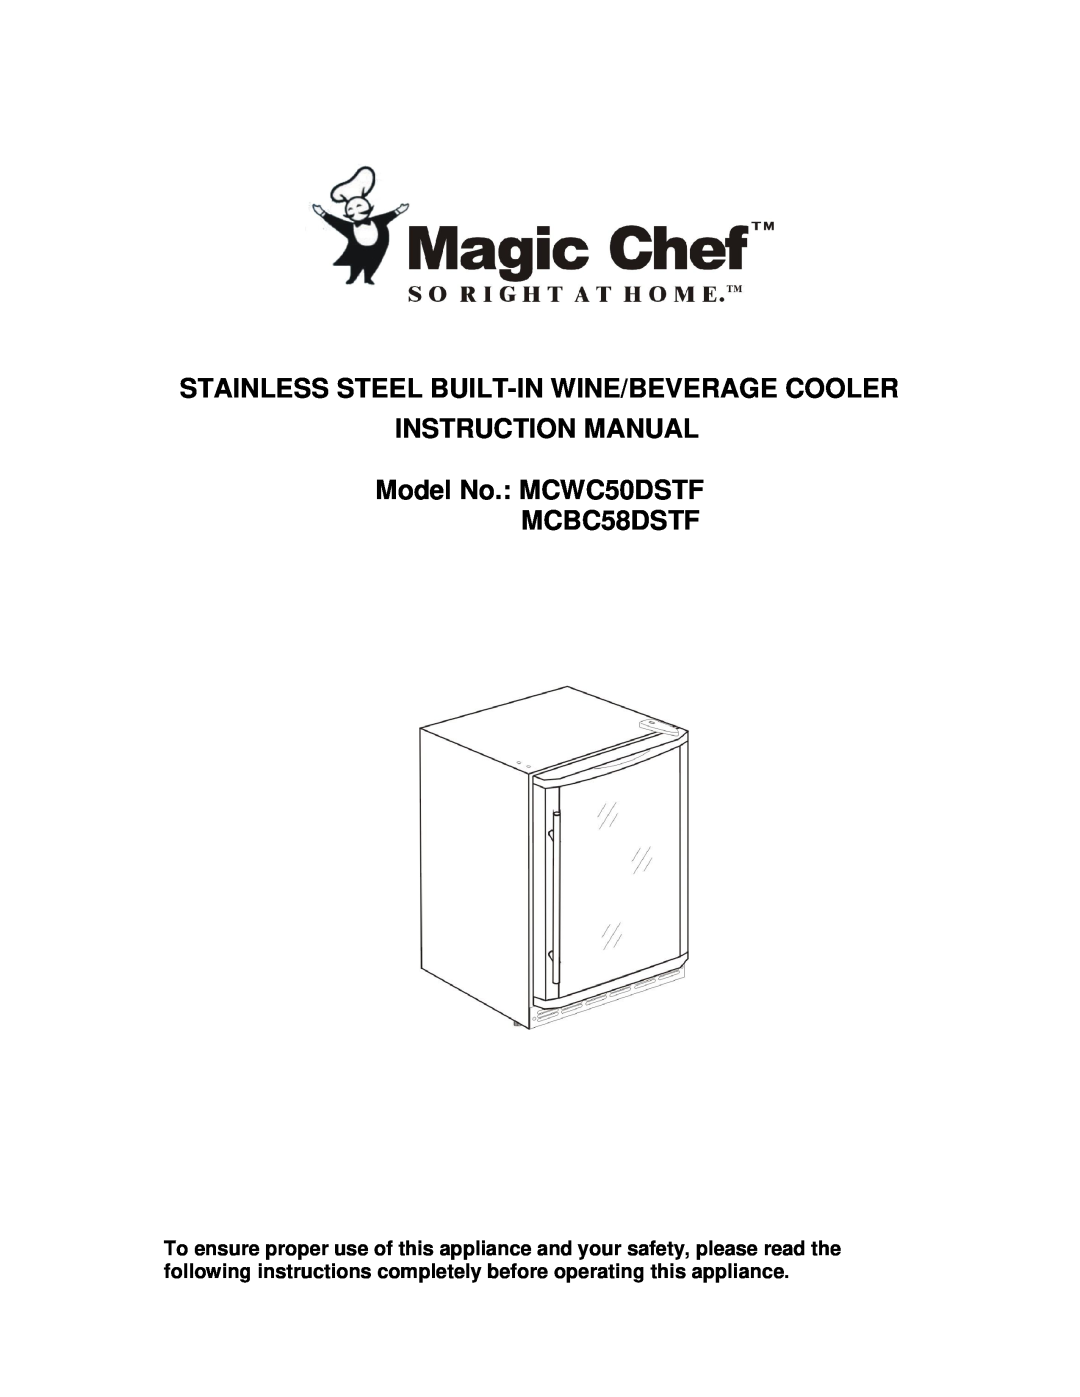 Magic Chef MCBC58DSTF instruction manual Stainless Steel Built-In Wine/Beverage Cooler Instruction Manual 